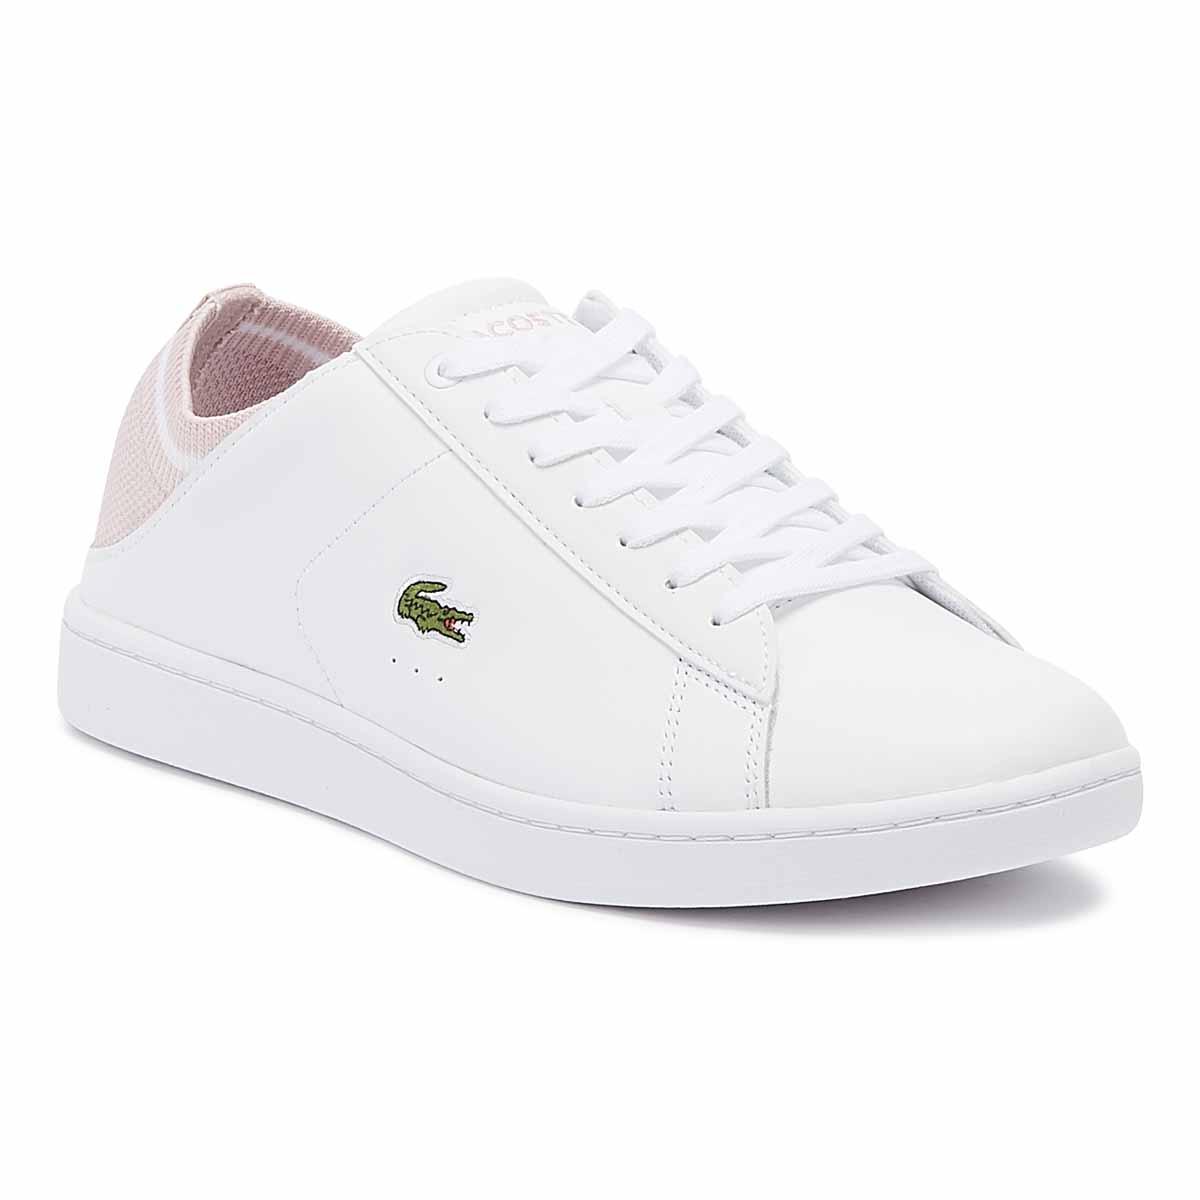 Lacoste Leather Carnaby Evo Duo 119 1 